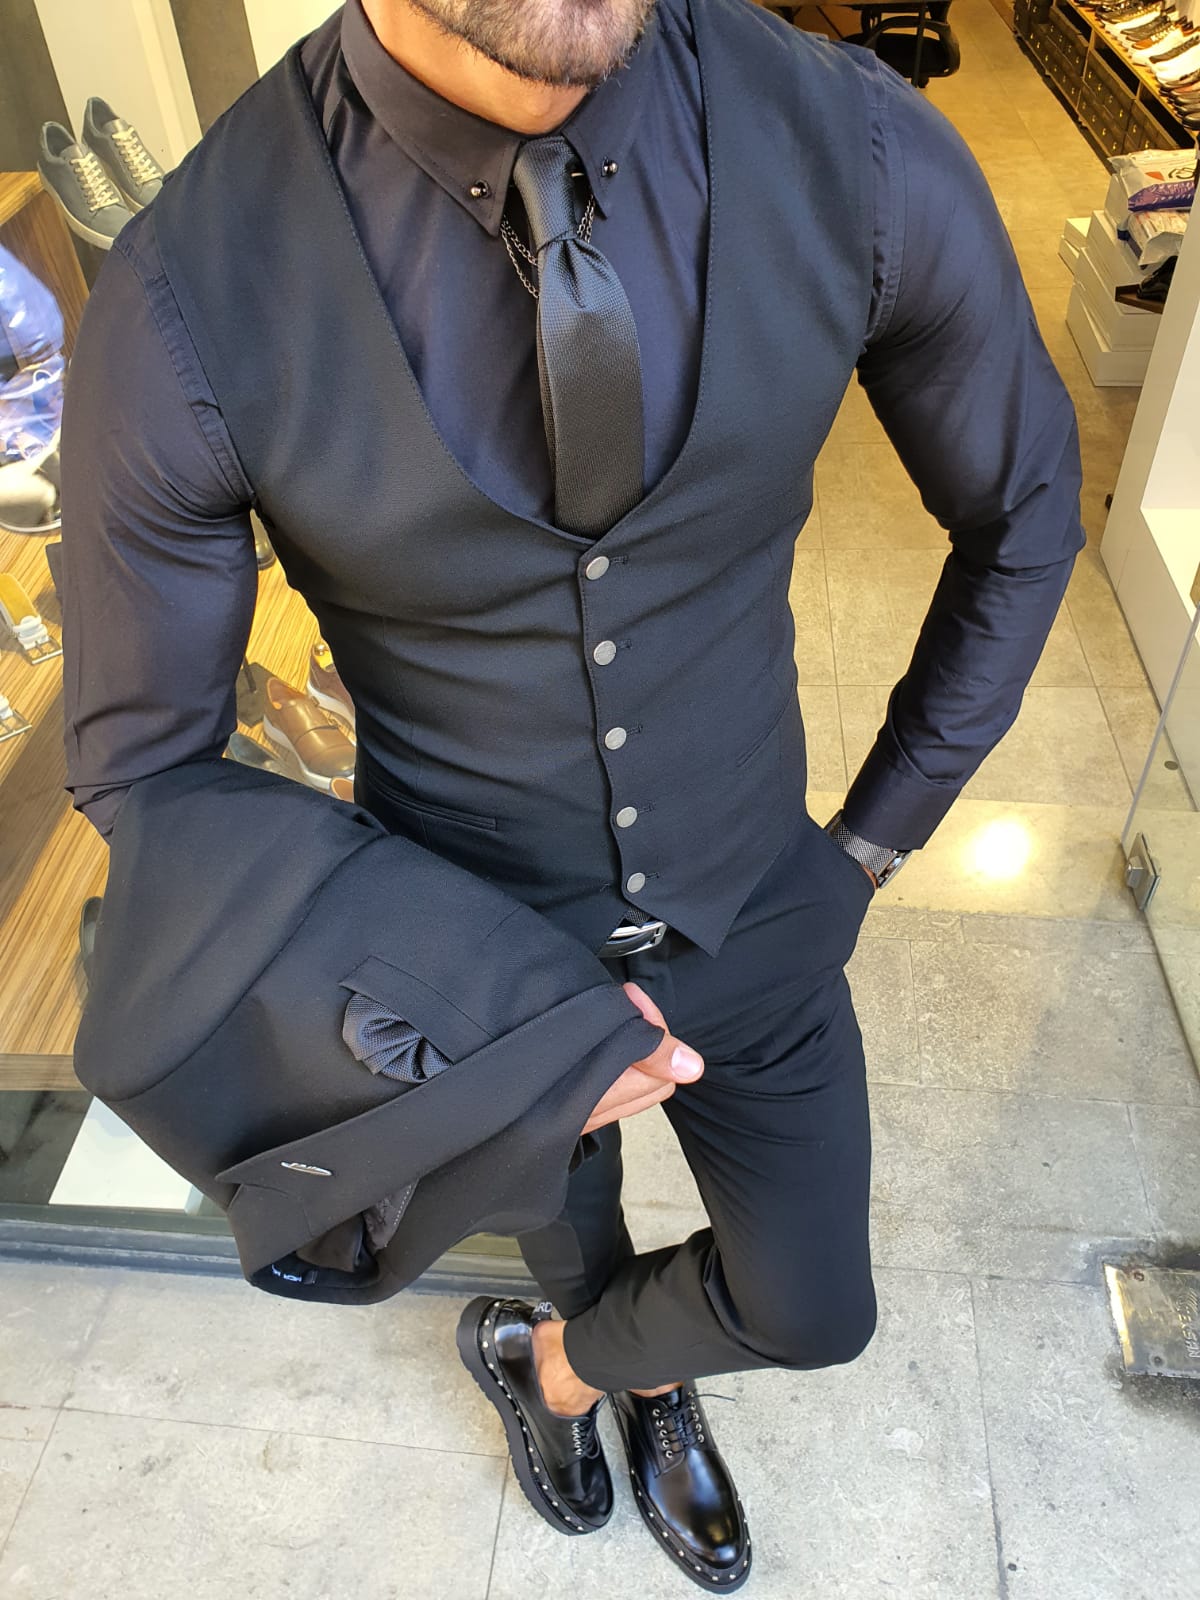 Buy Black Slim Fit Suit by GentWith.com with Free Shipping